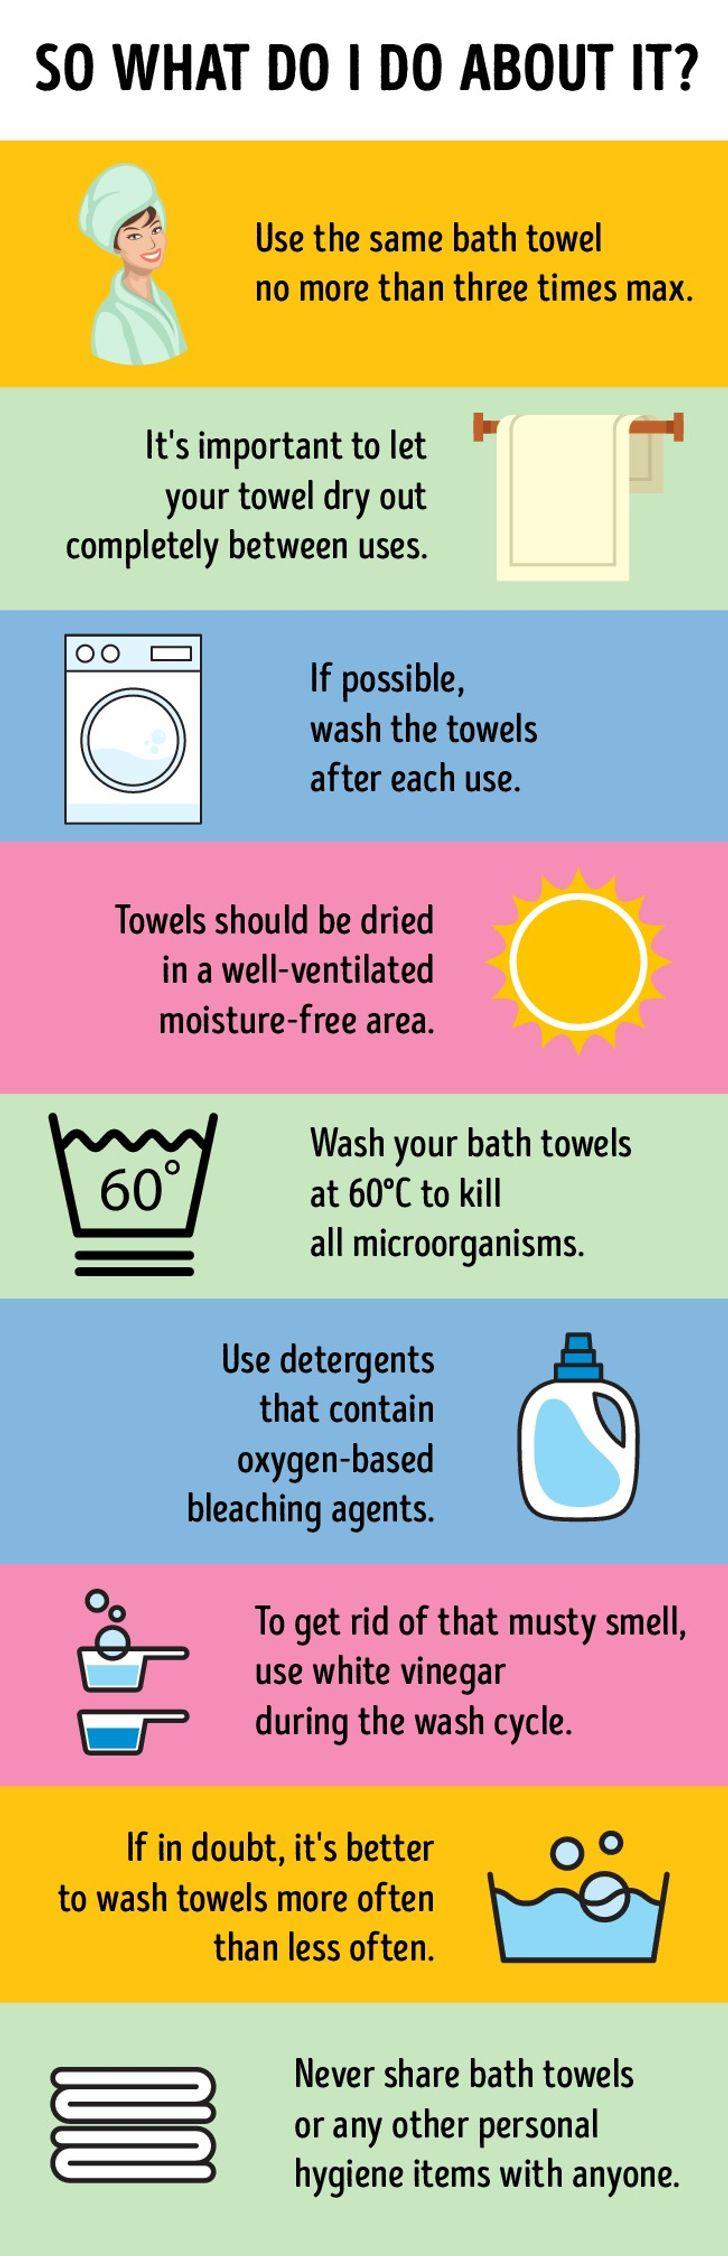 How Often Should You Wash Your Towels And At What Temperature?